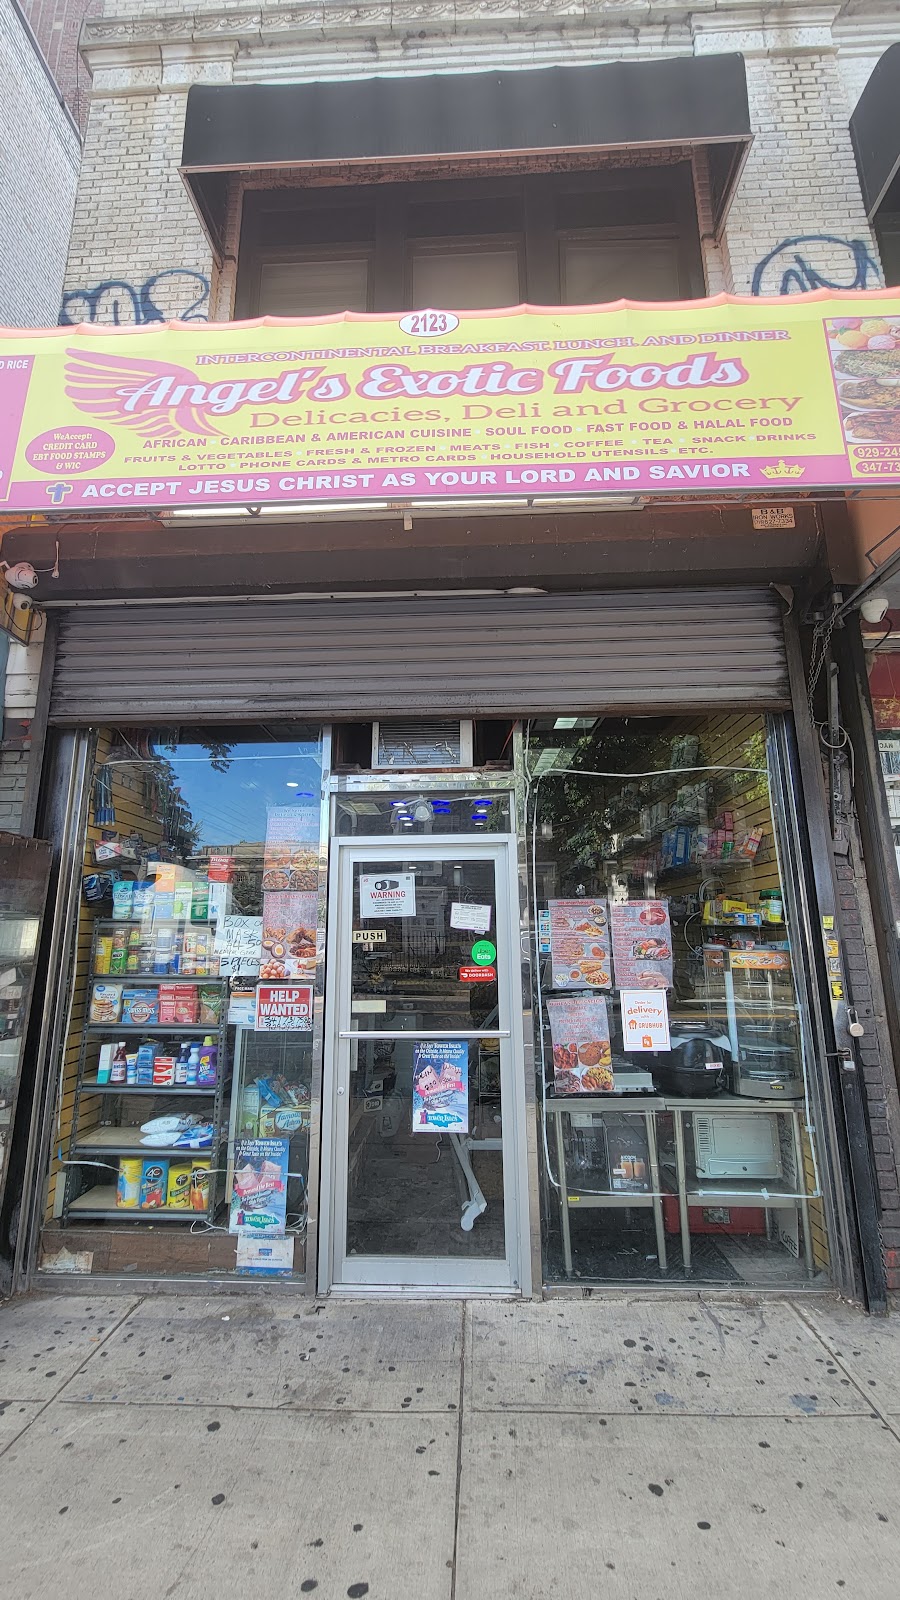 Angels Exotic Foods and Intercontinental Cuisine | 2123 Church Ave, Brooklyn, NY 11226 | Phone: (929) 245-4193